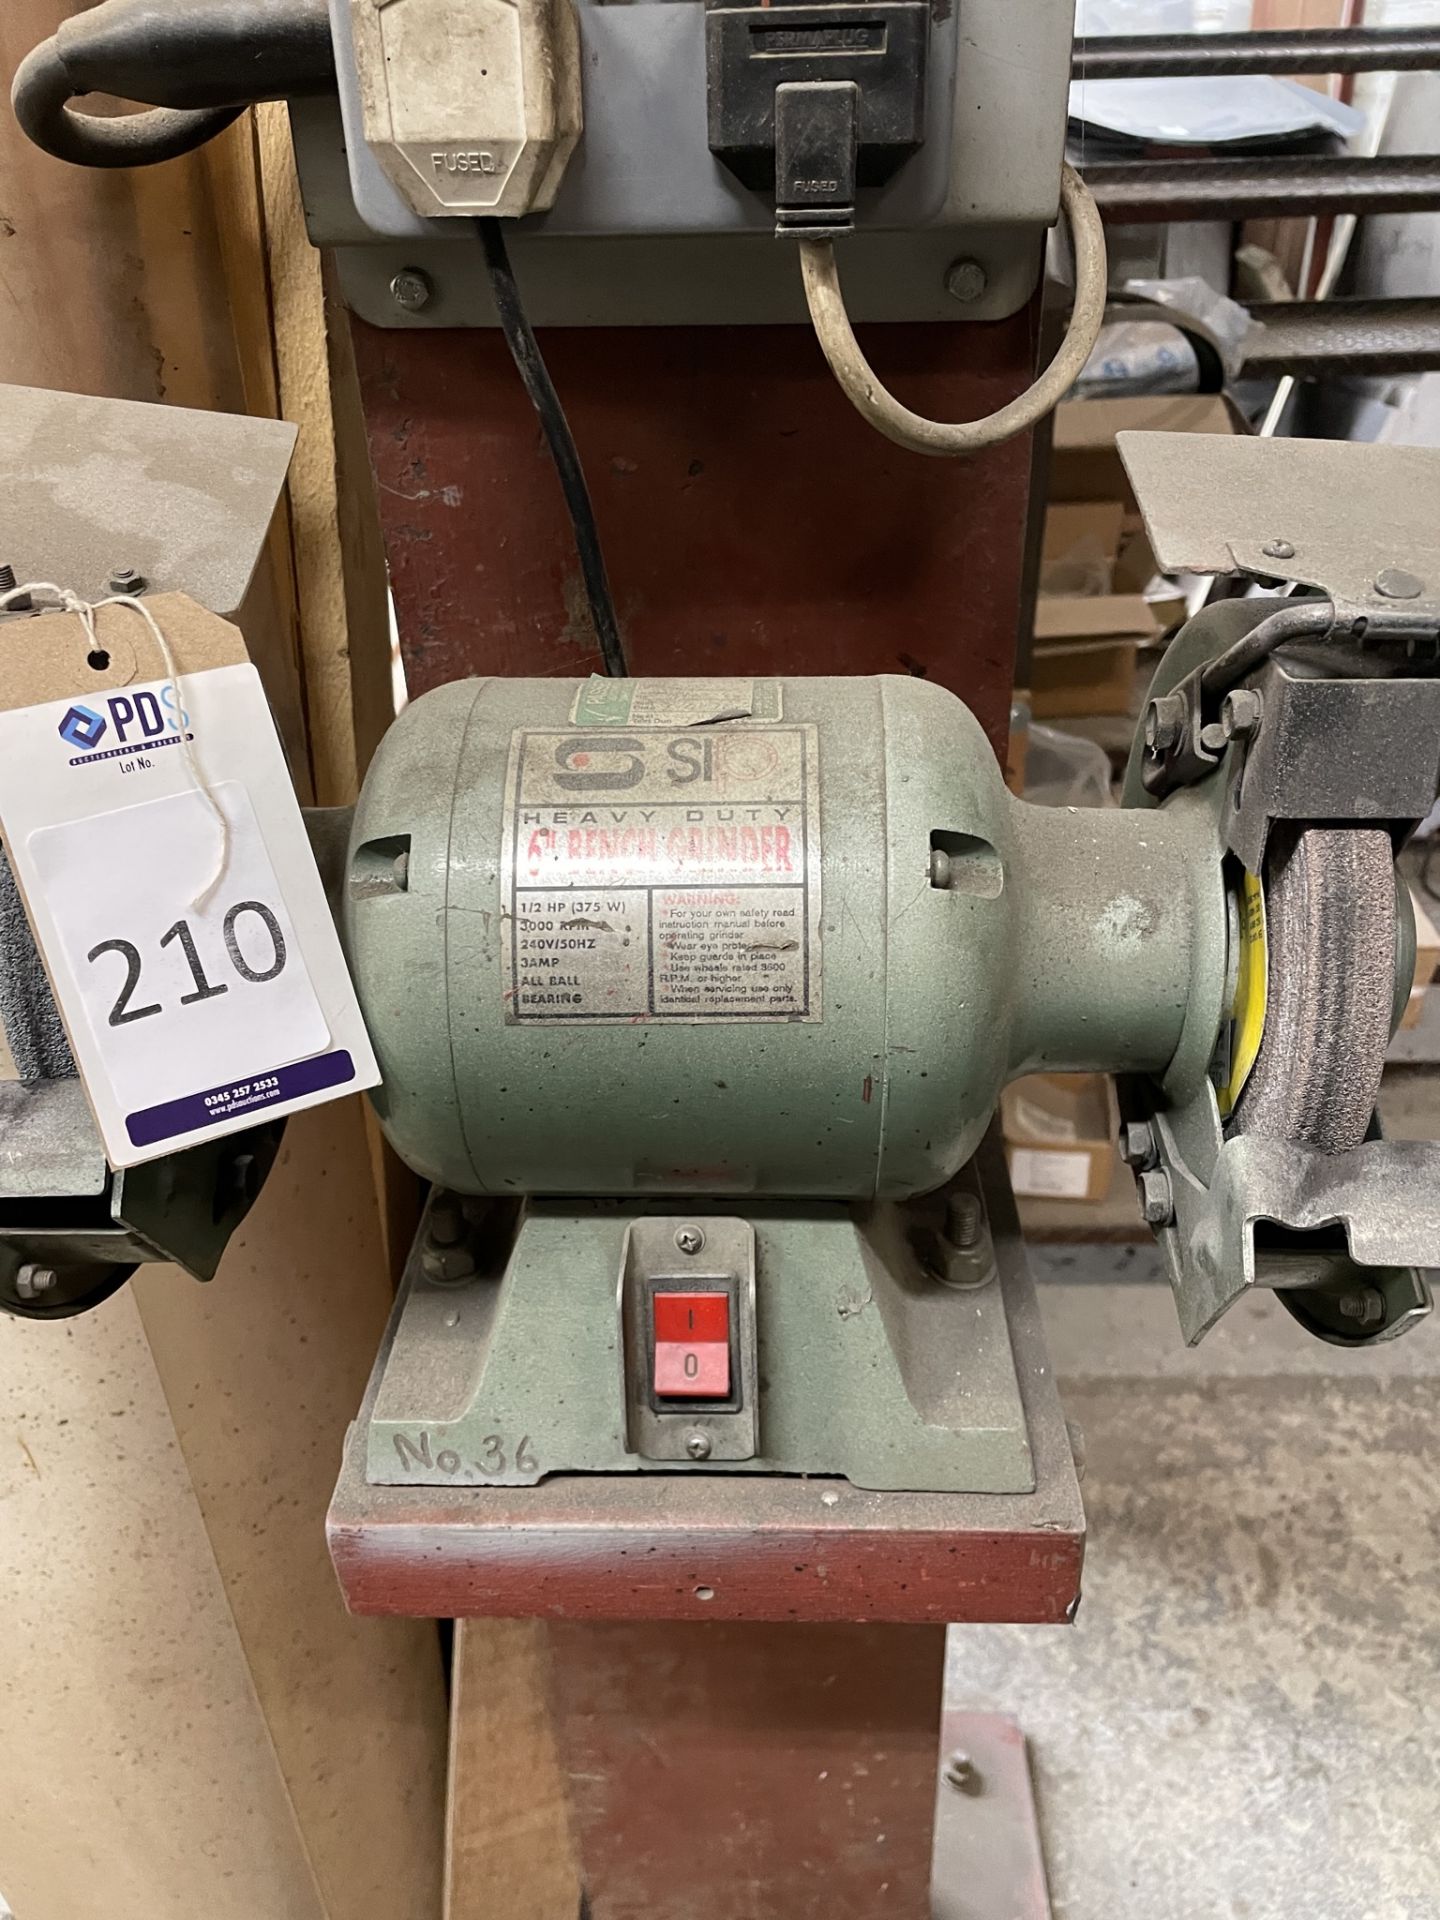 SIP 6” Heavy Duty Bench Grinder, 240v (Location Hythe. Please Refer to General Notes)